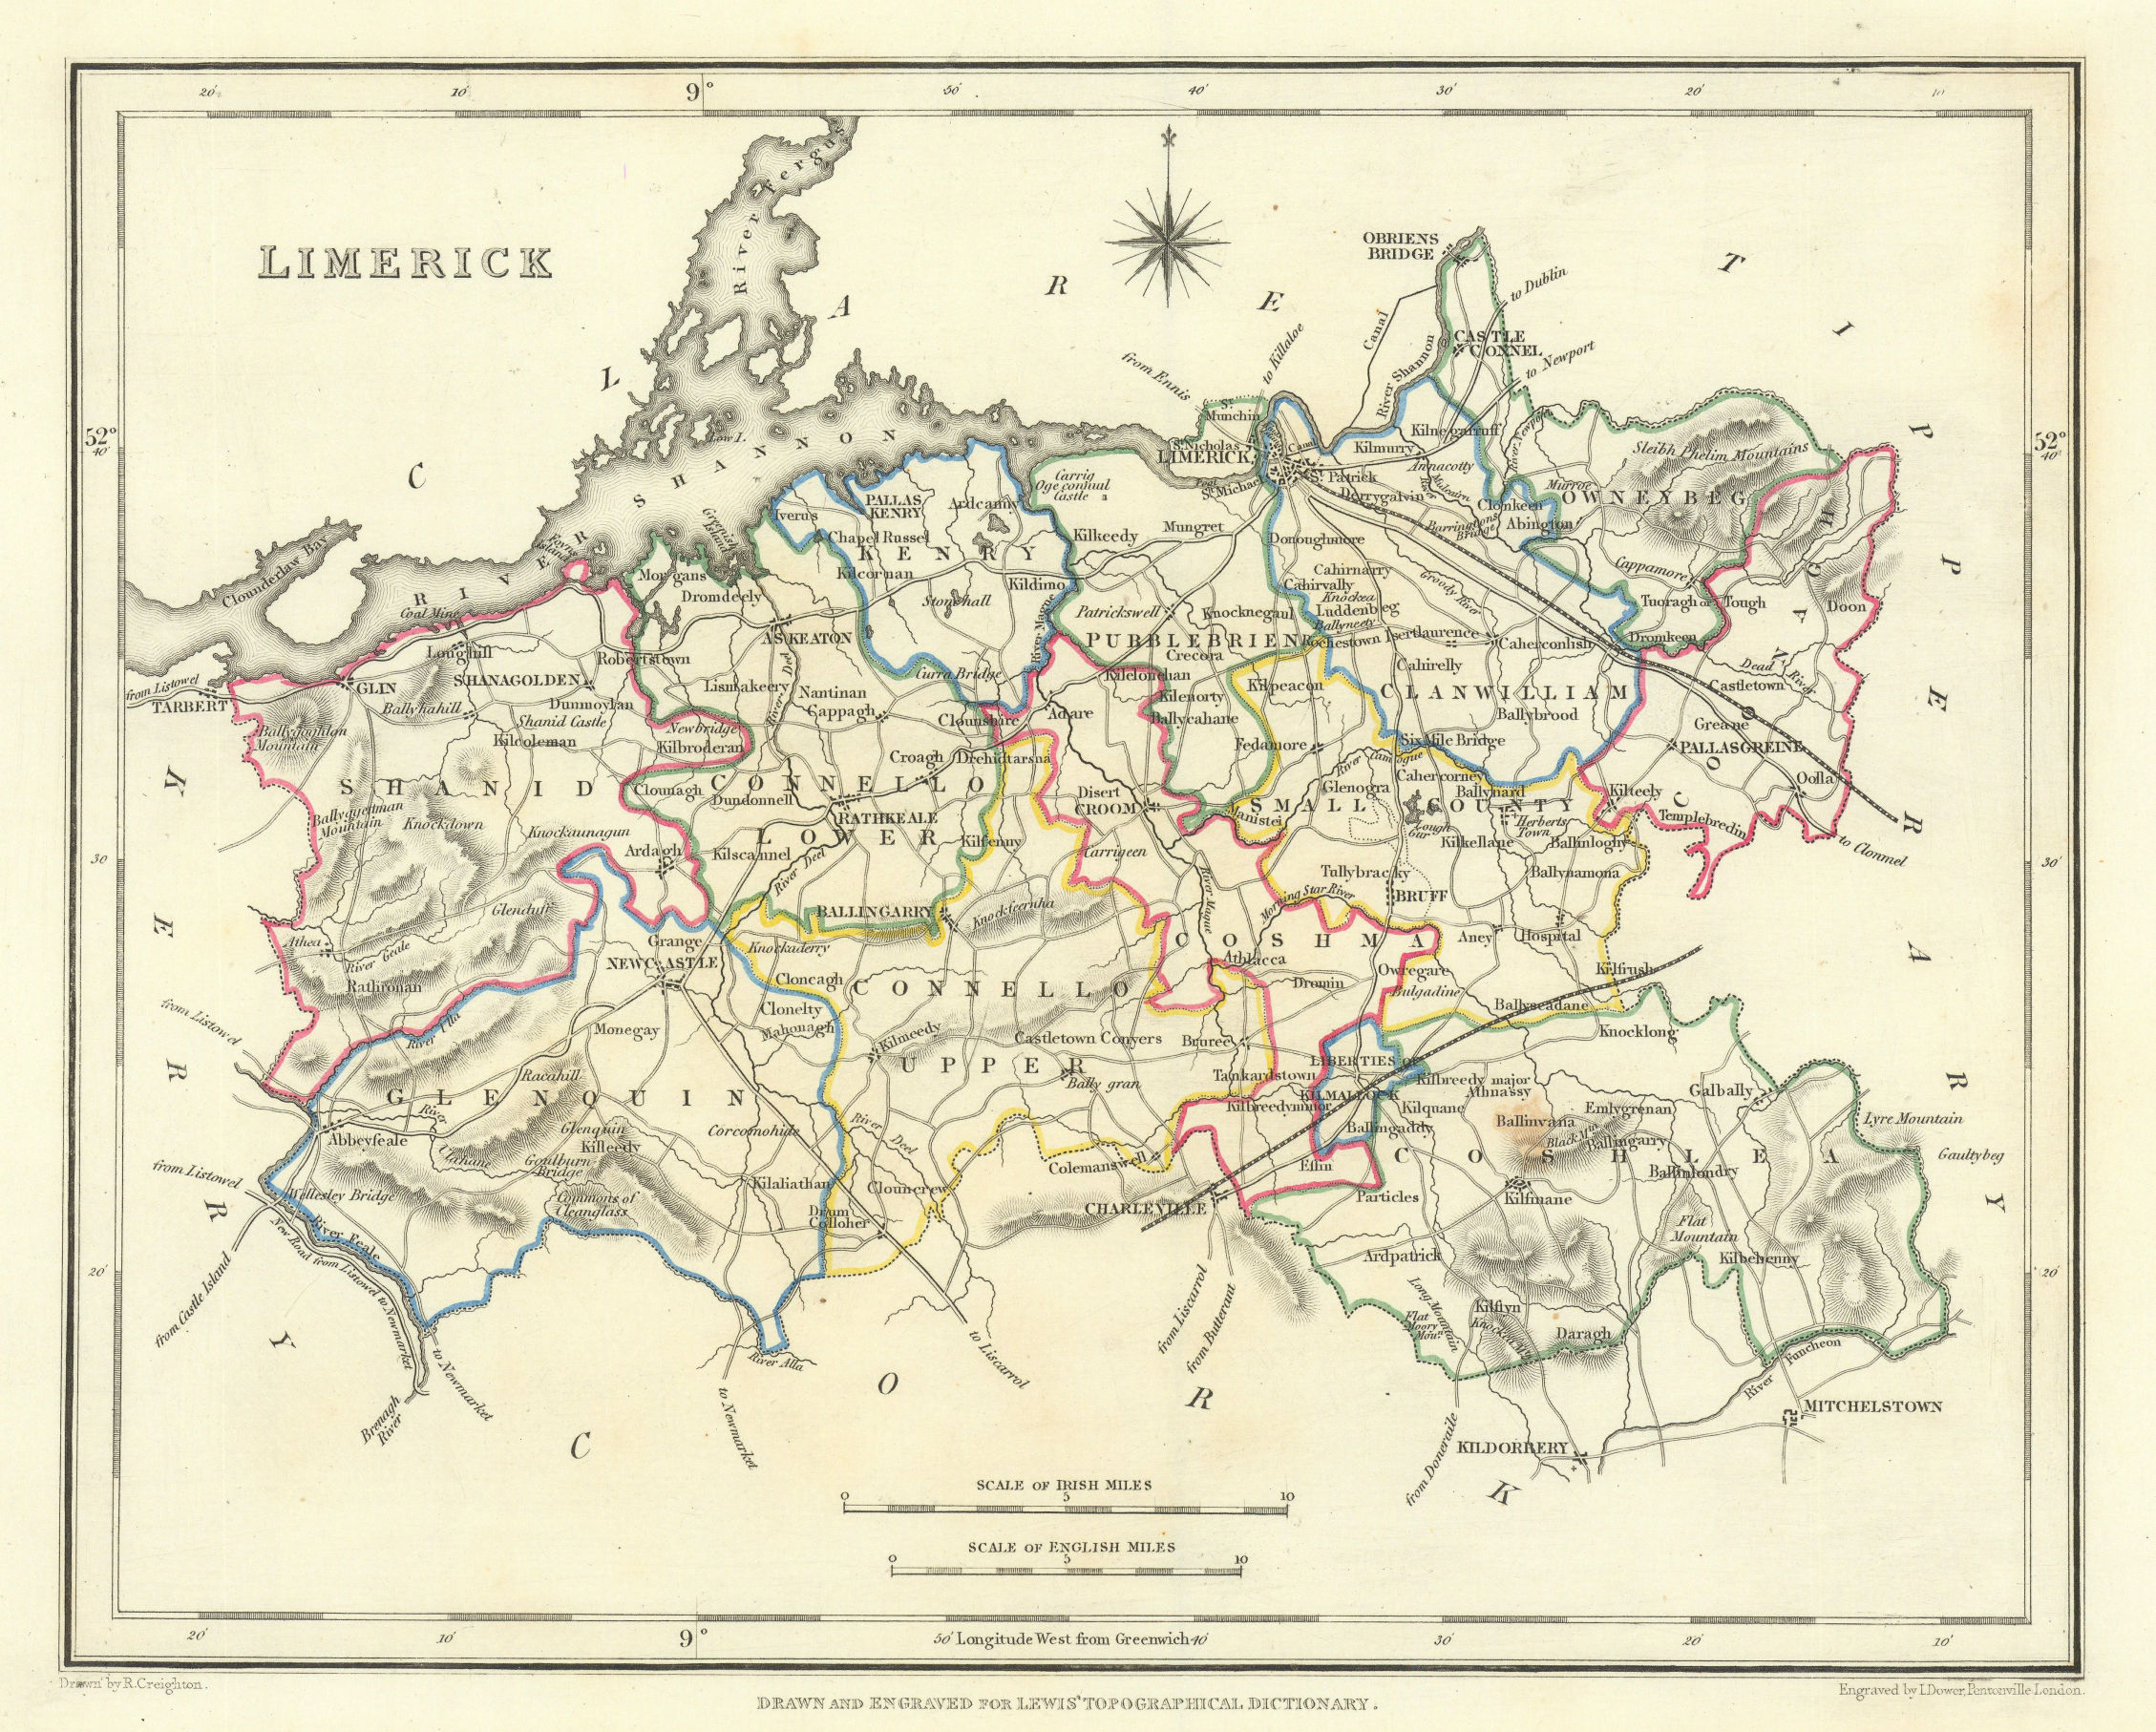 COUNTY LIMERICK antique map for LEWIS by DOWER & CREIGHTON. Ireland 1846